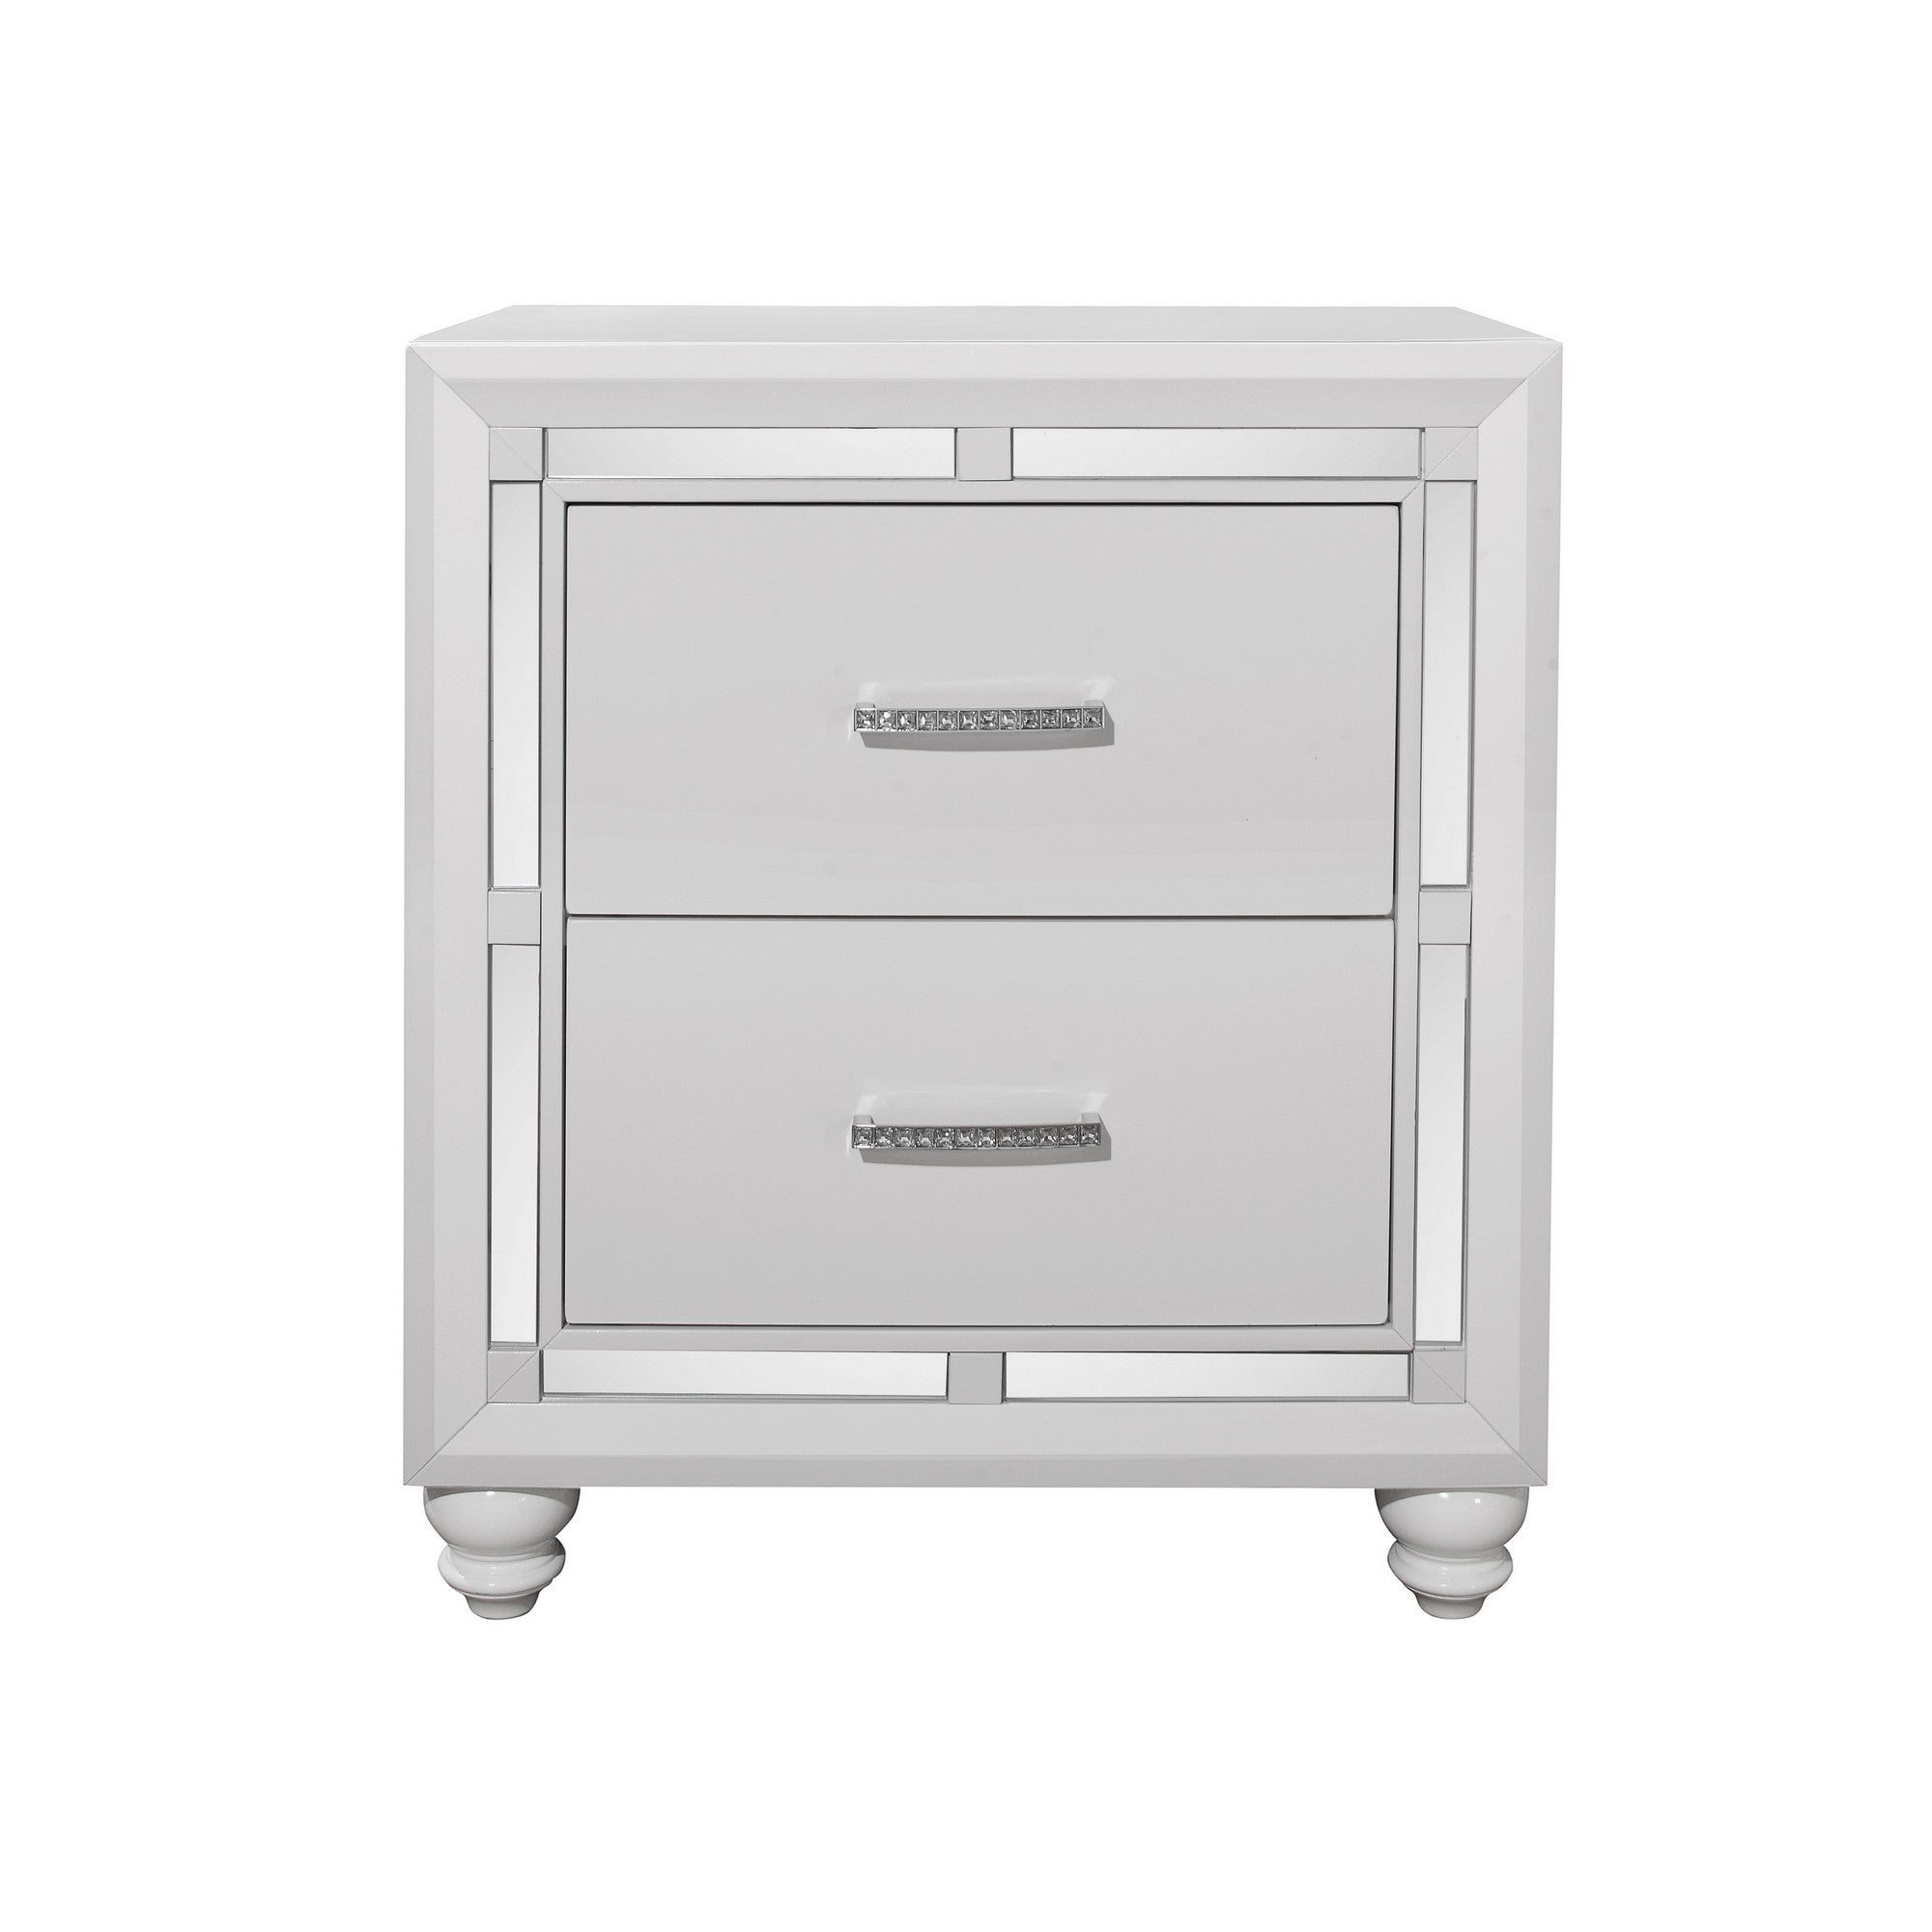 White Tone Nightstand with 2 Drawer  Mirror Trim Accent Default Title